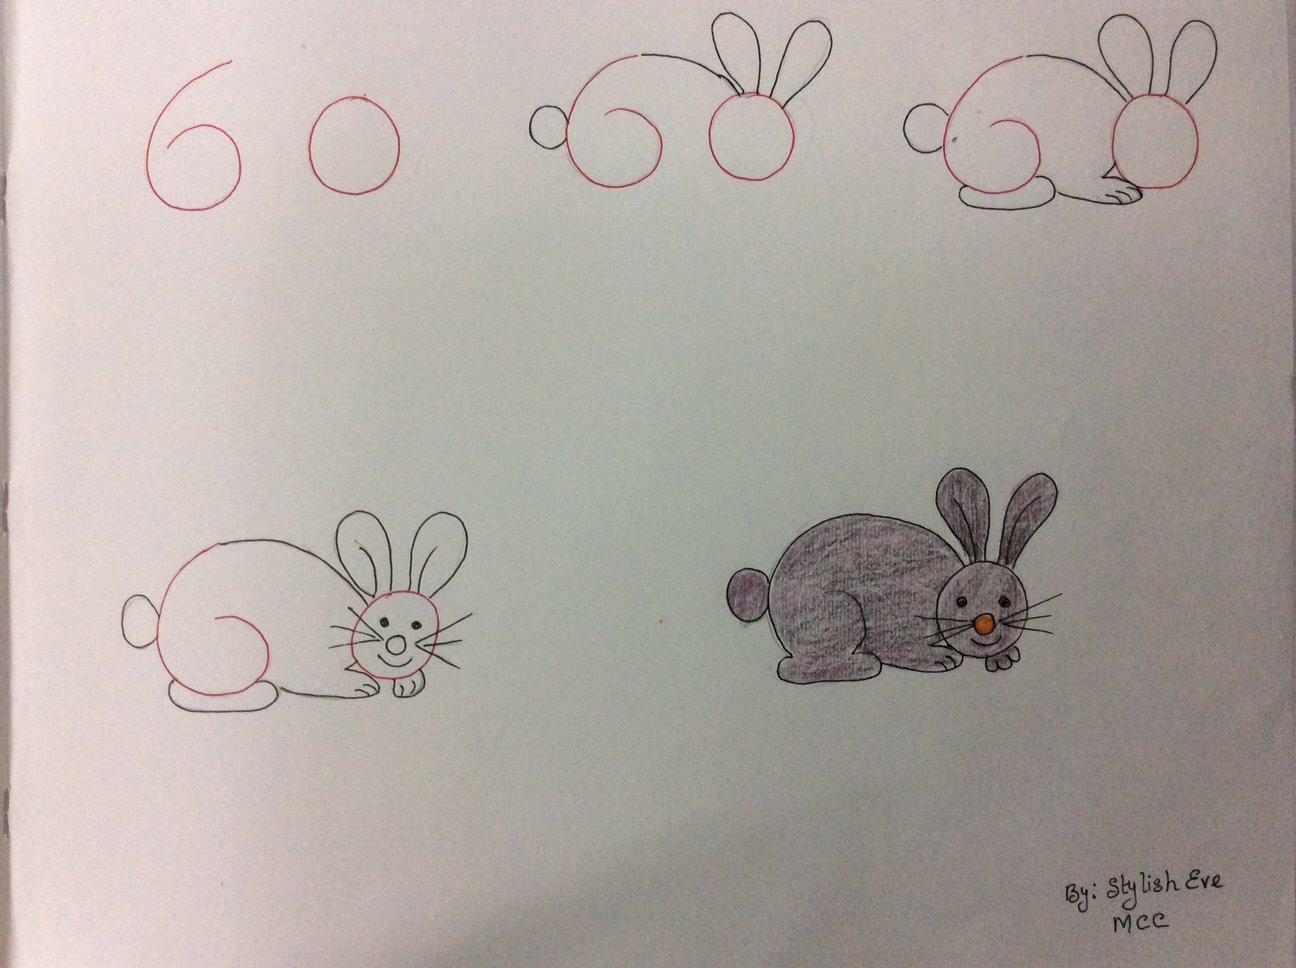 60 Fun Kids Drawings With Number As a Base